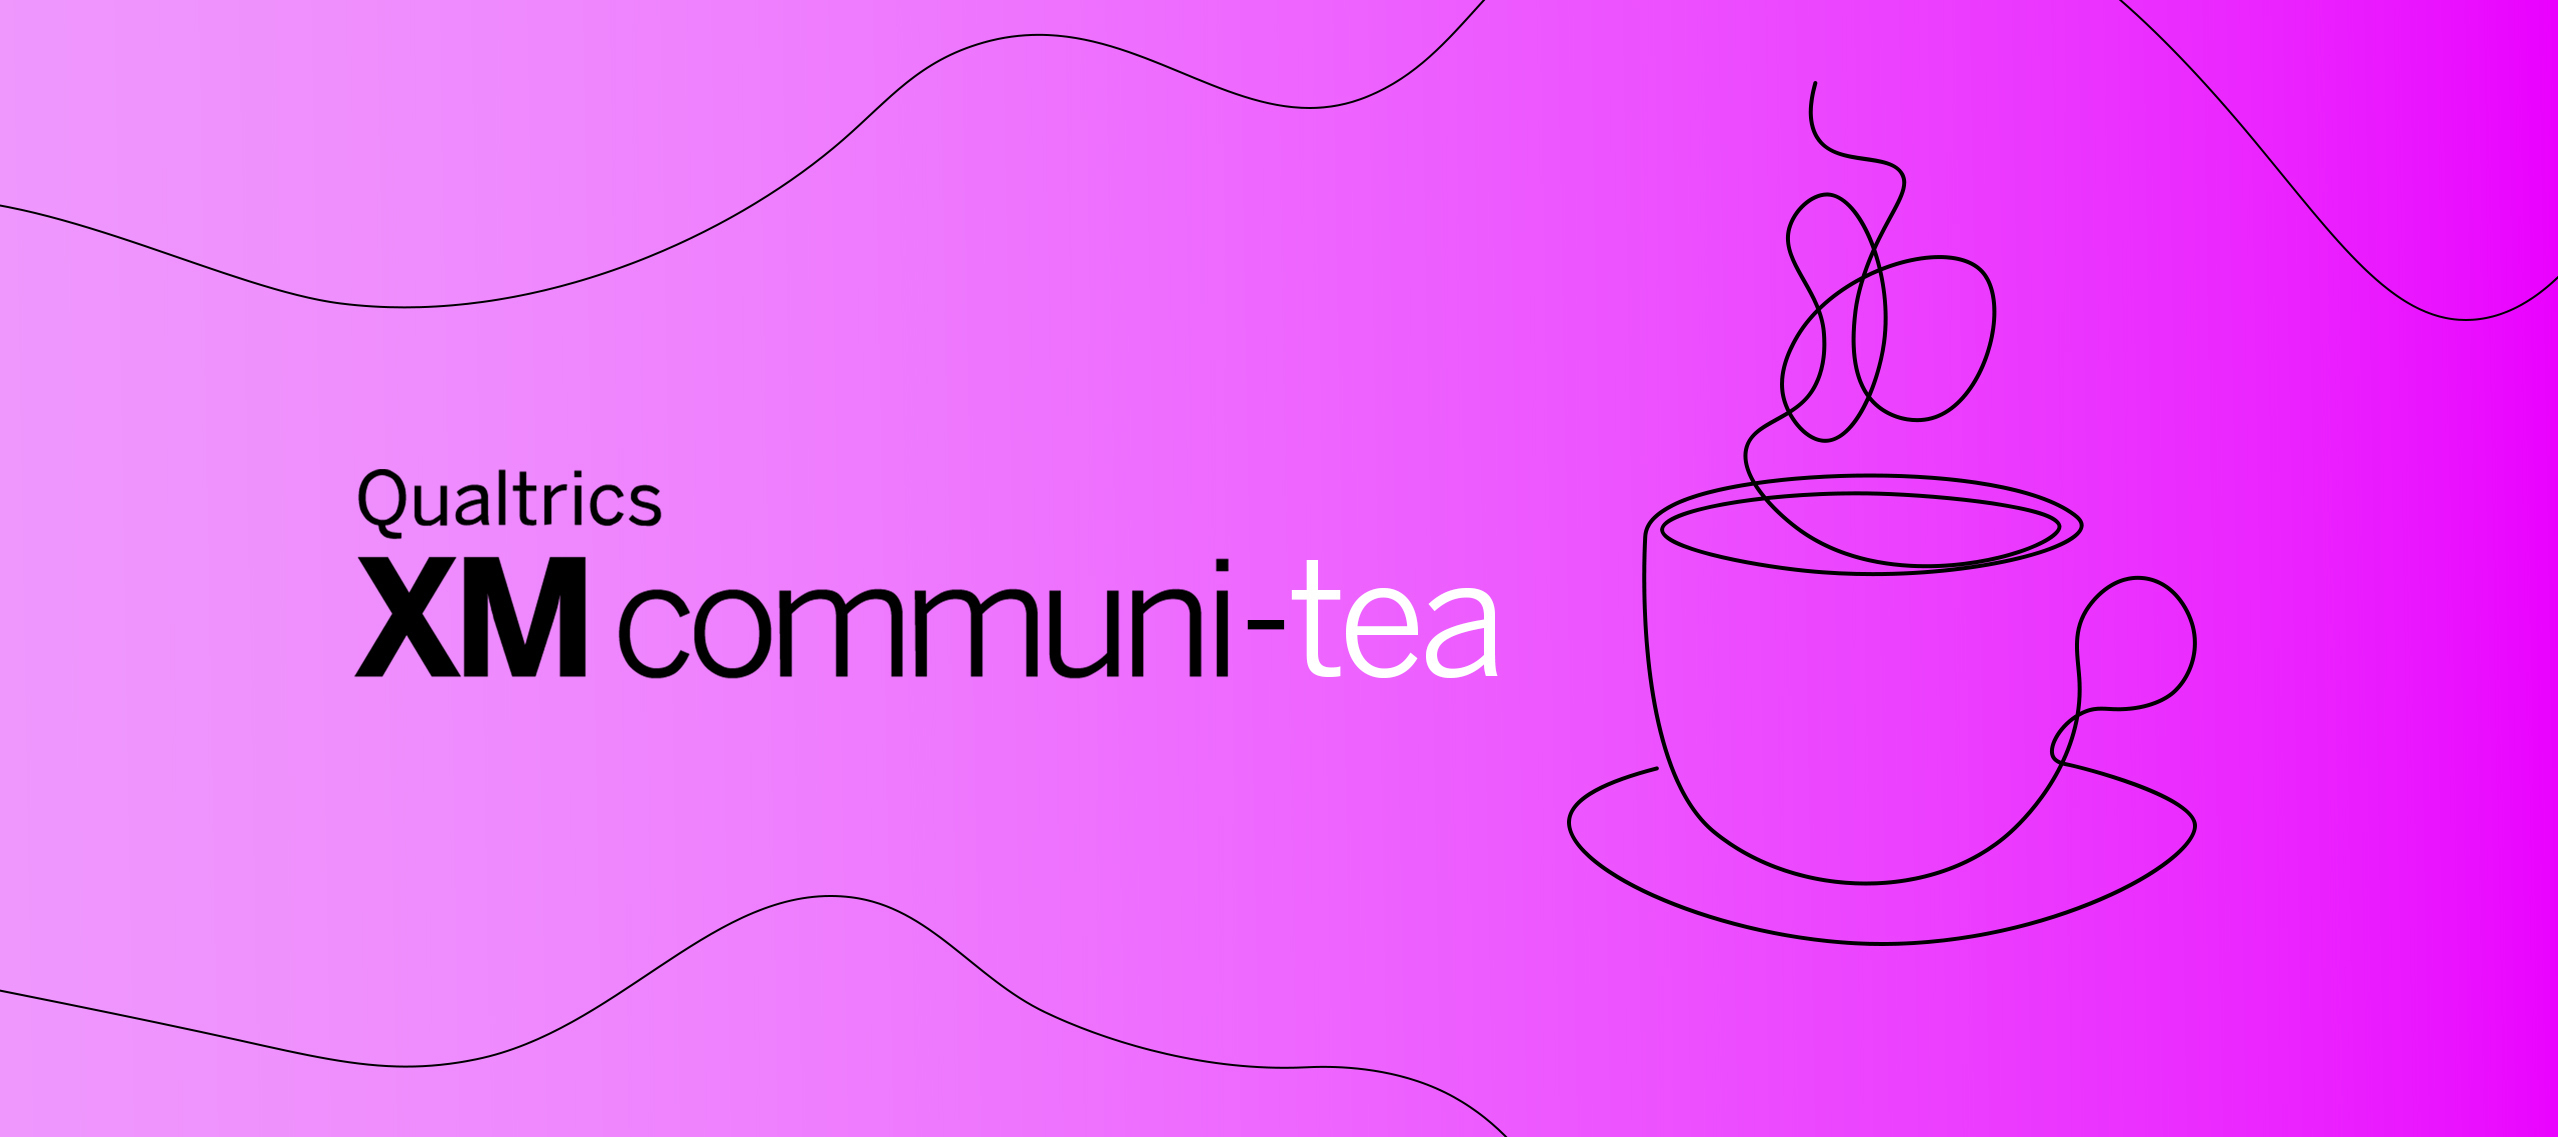 XM Communi-tea Podcast: Welcome to Our New Podcast Series